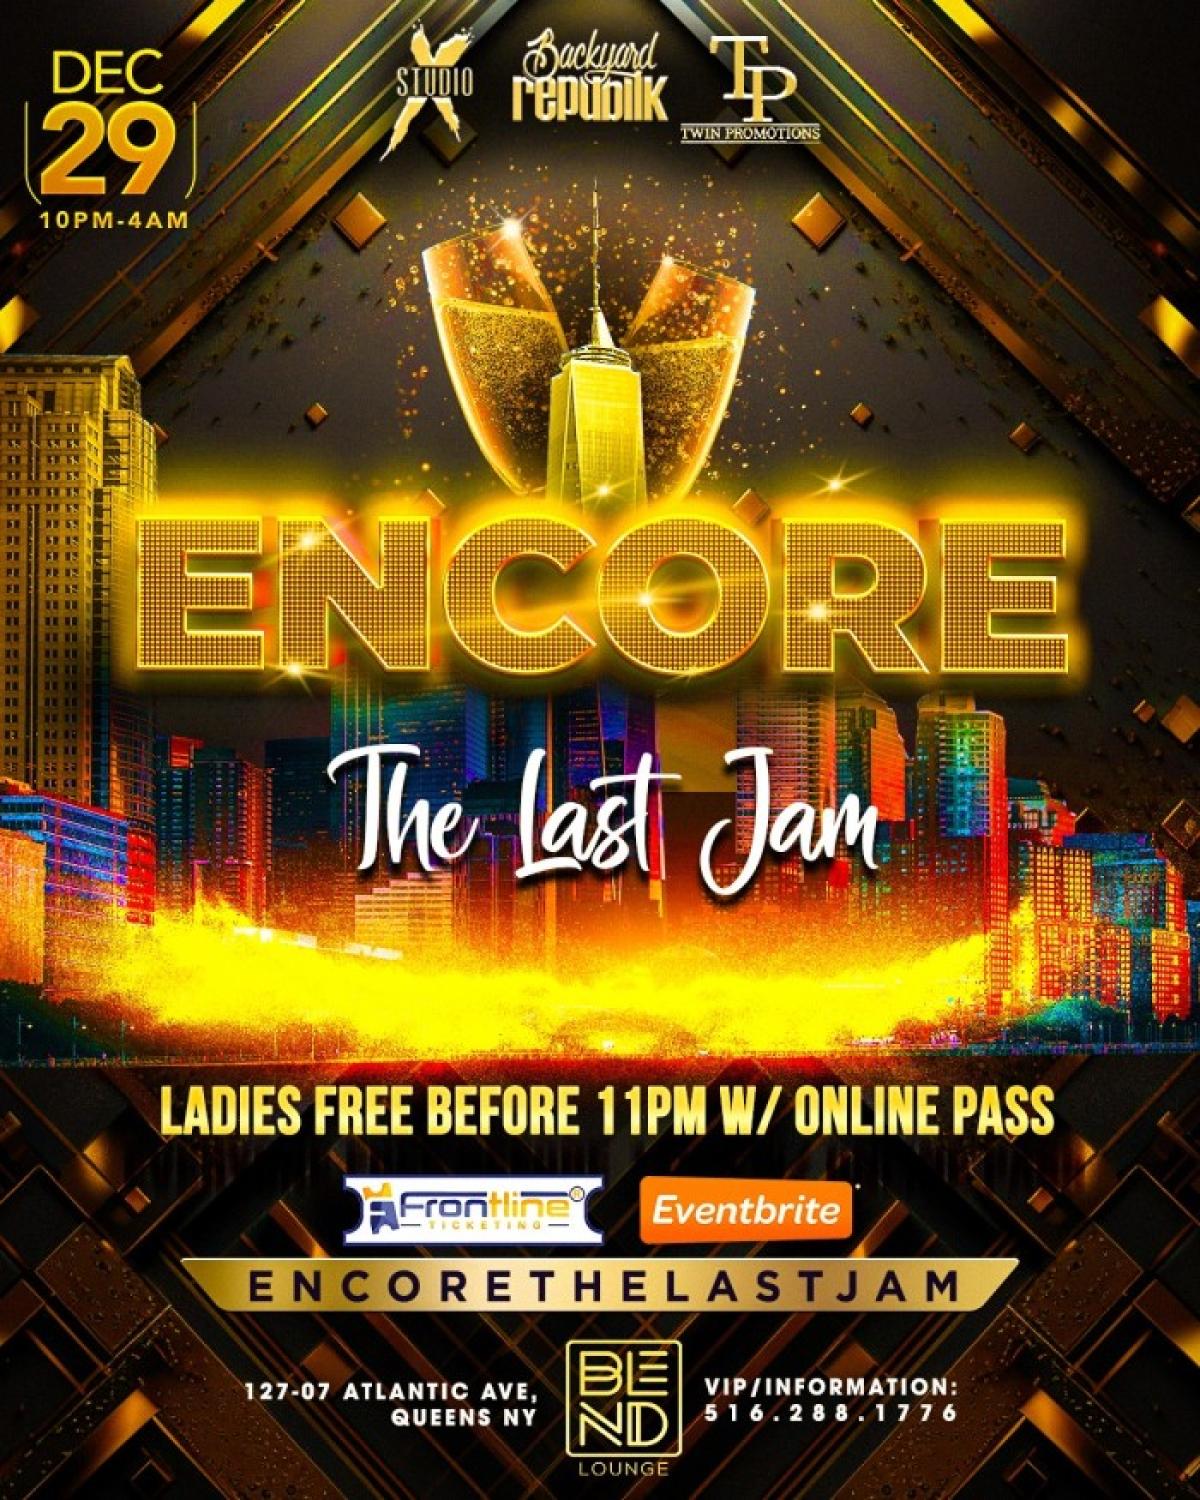 Encore - The Last Jam flyer or graphic.